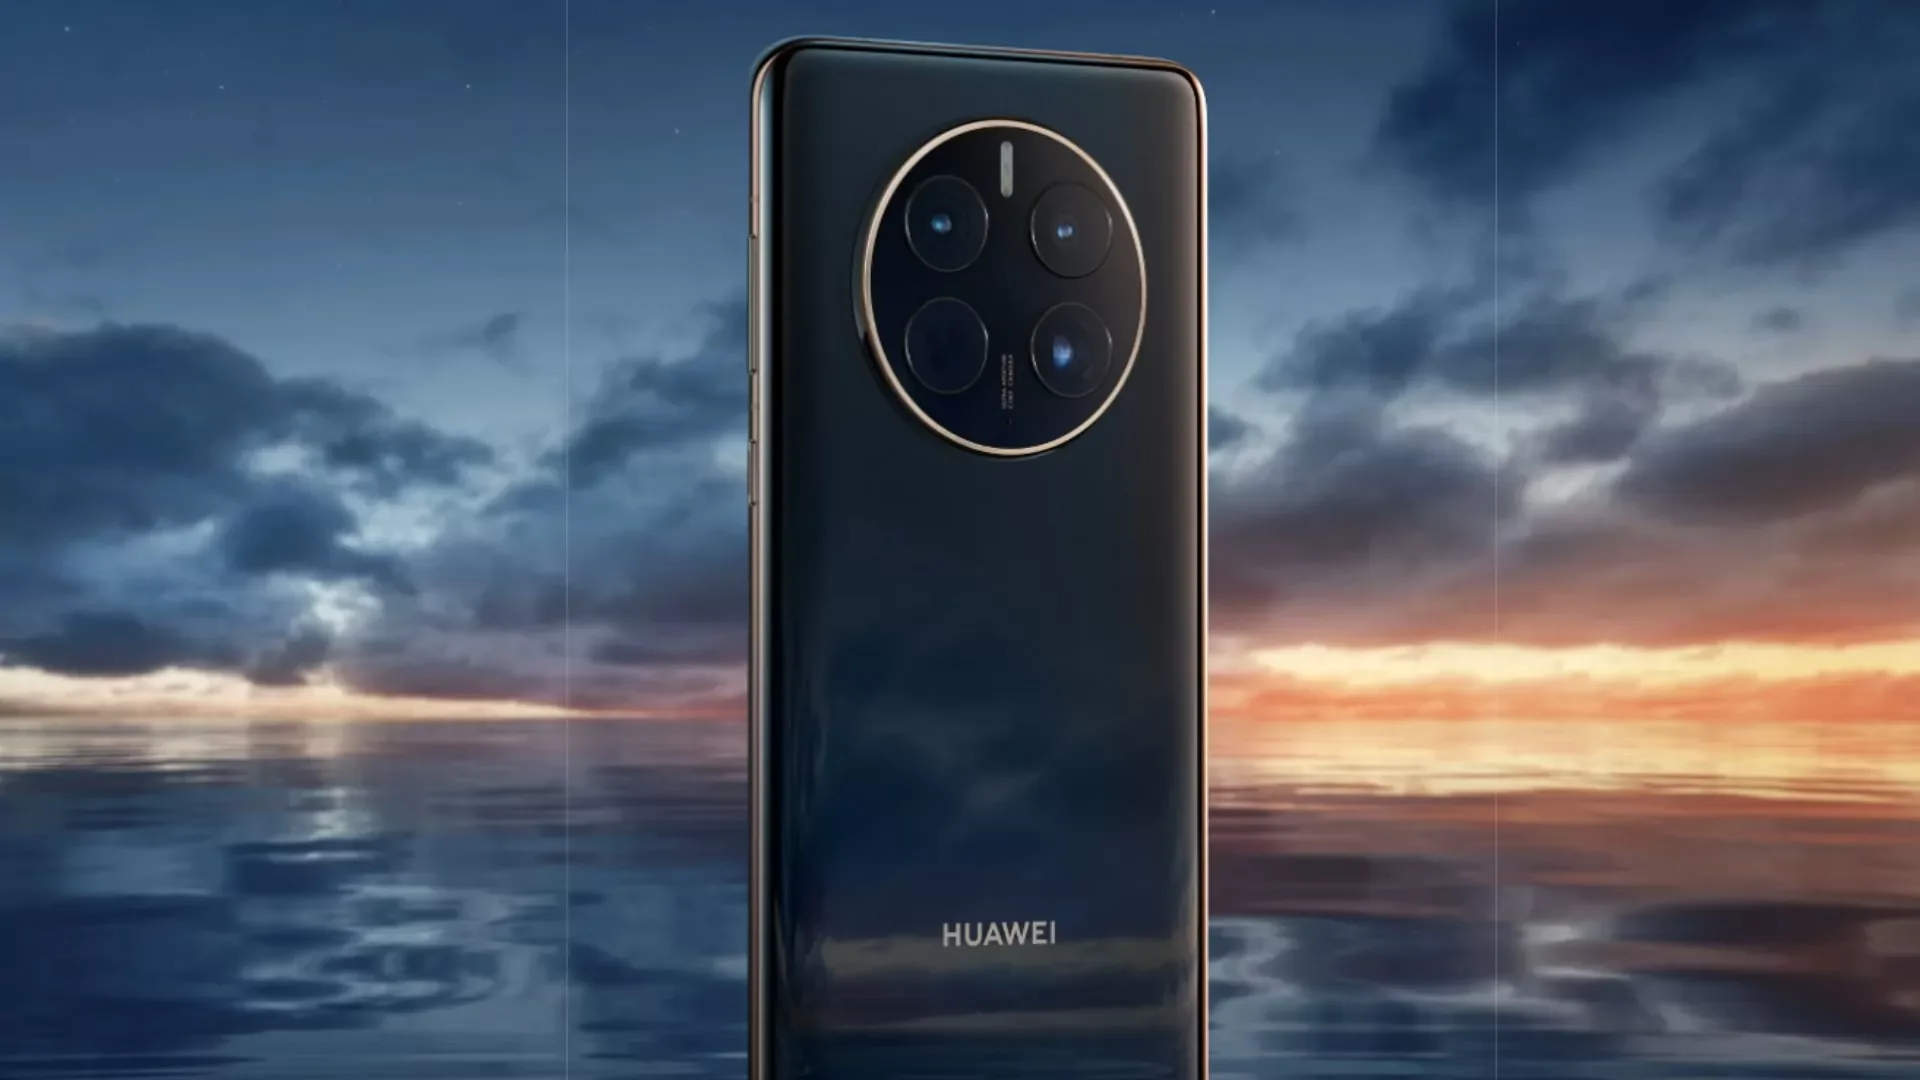 The European presentation of HUAWEI Mate 50 Pro will take place soon. The cost of the smartphone is already known